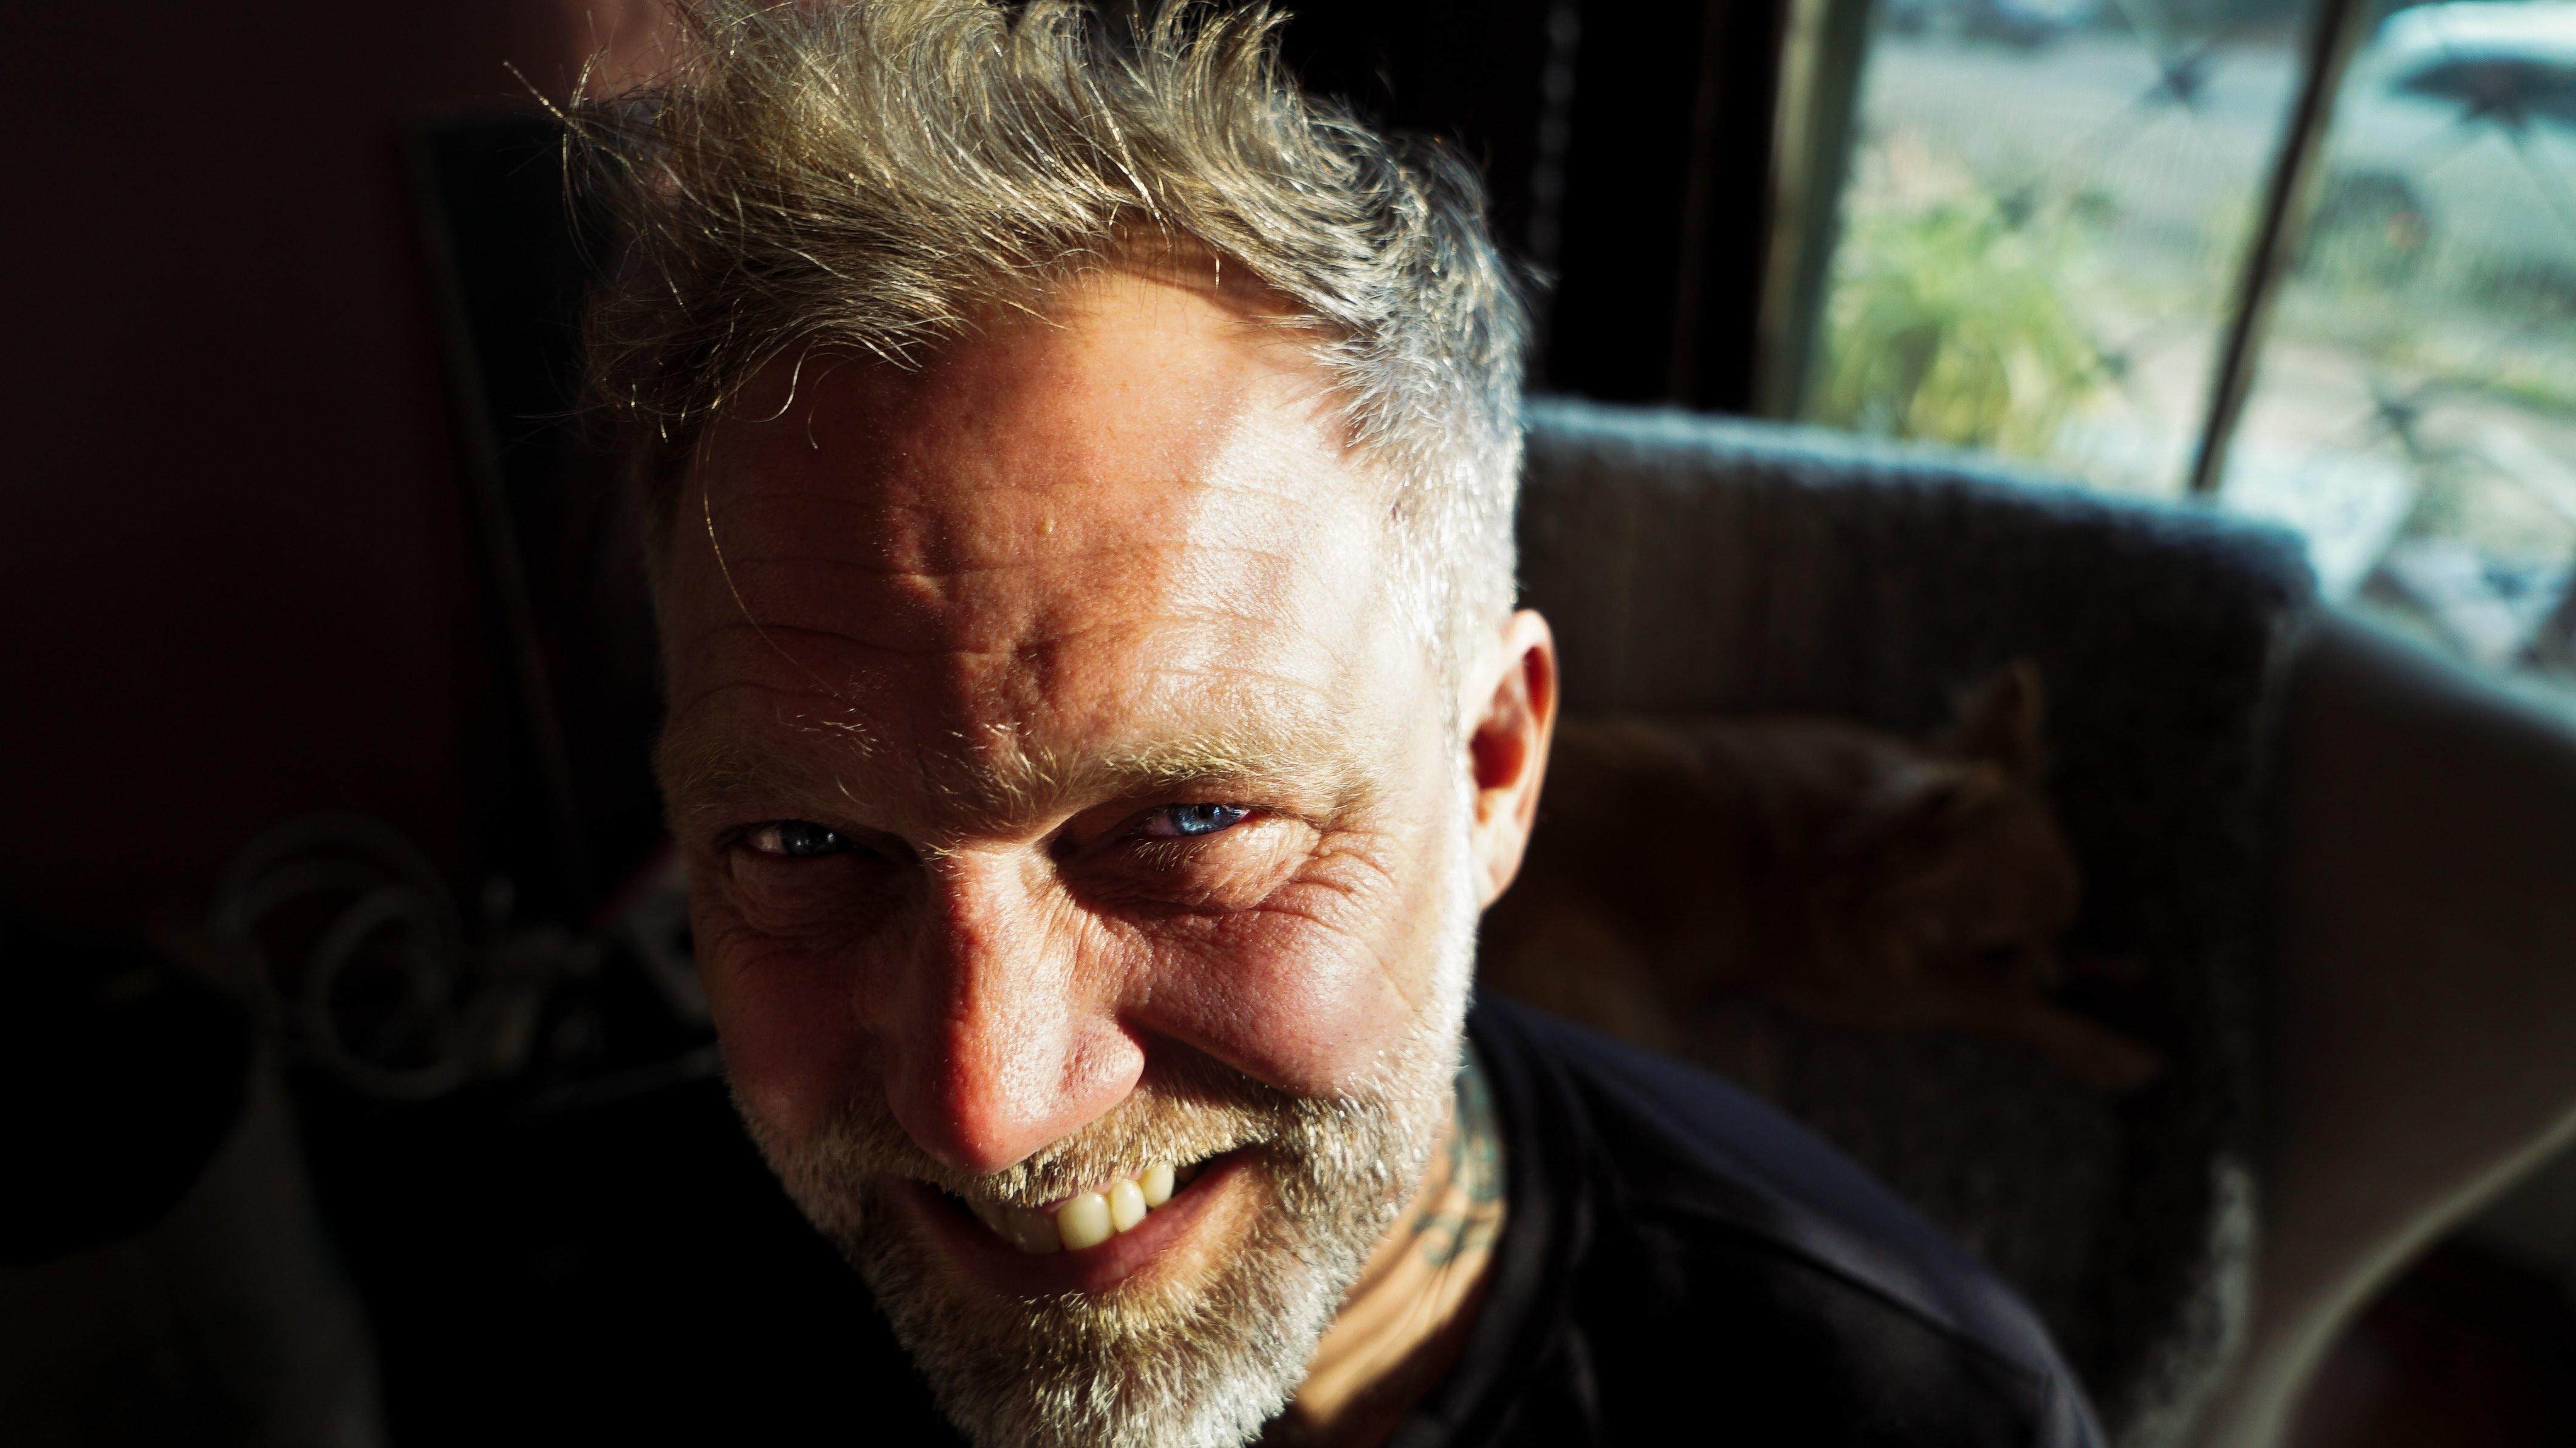 Lifeshop: Songwriting led by Anders Osborne